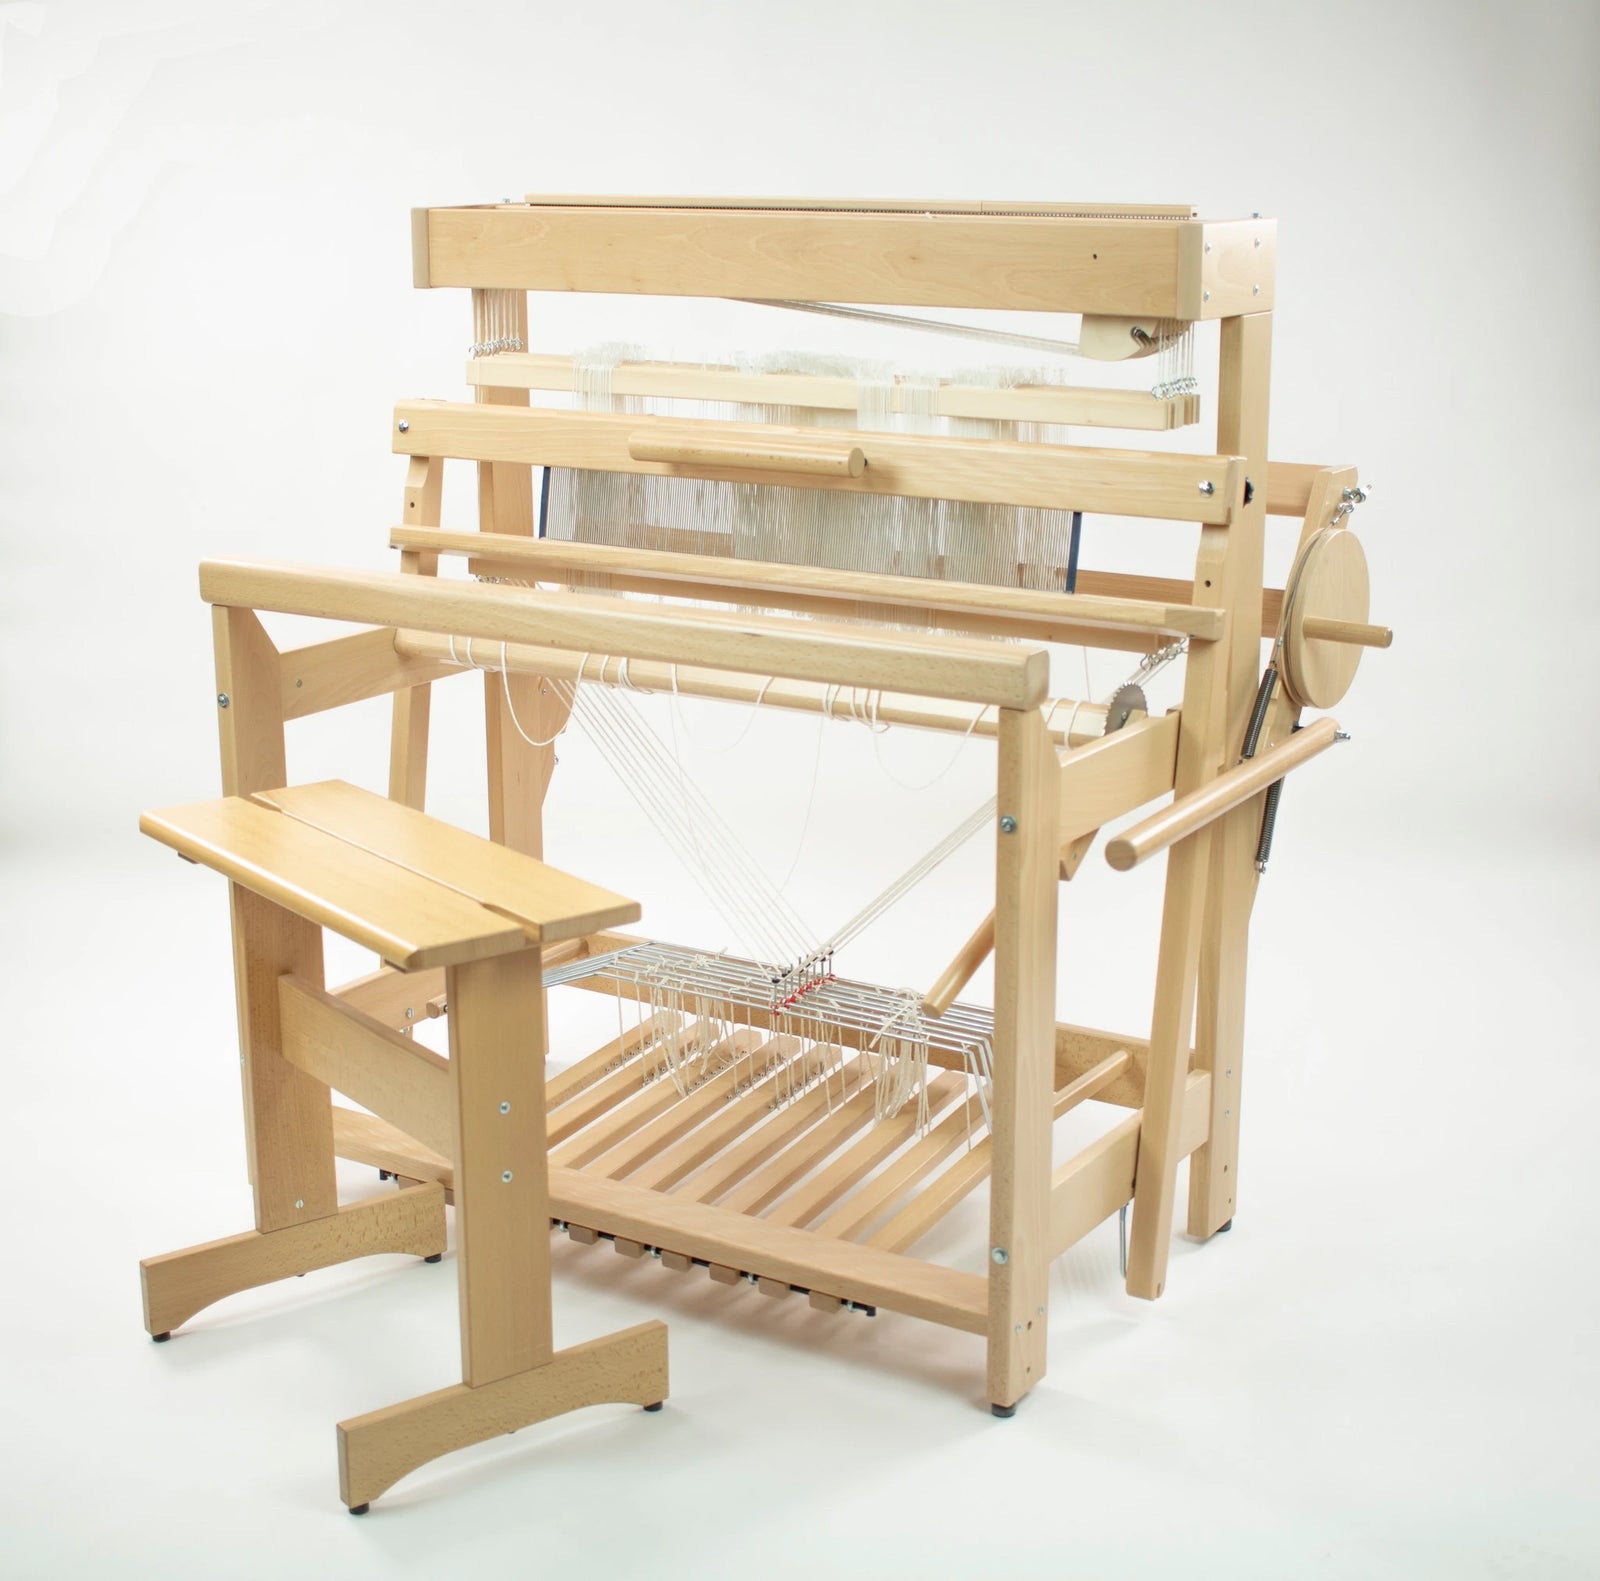 Baby Wolf Floor Loom by Schacht - GATHER Textiles Inc.